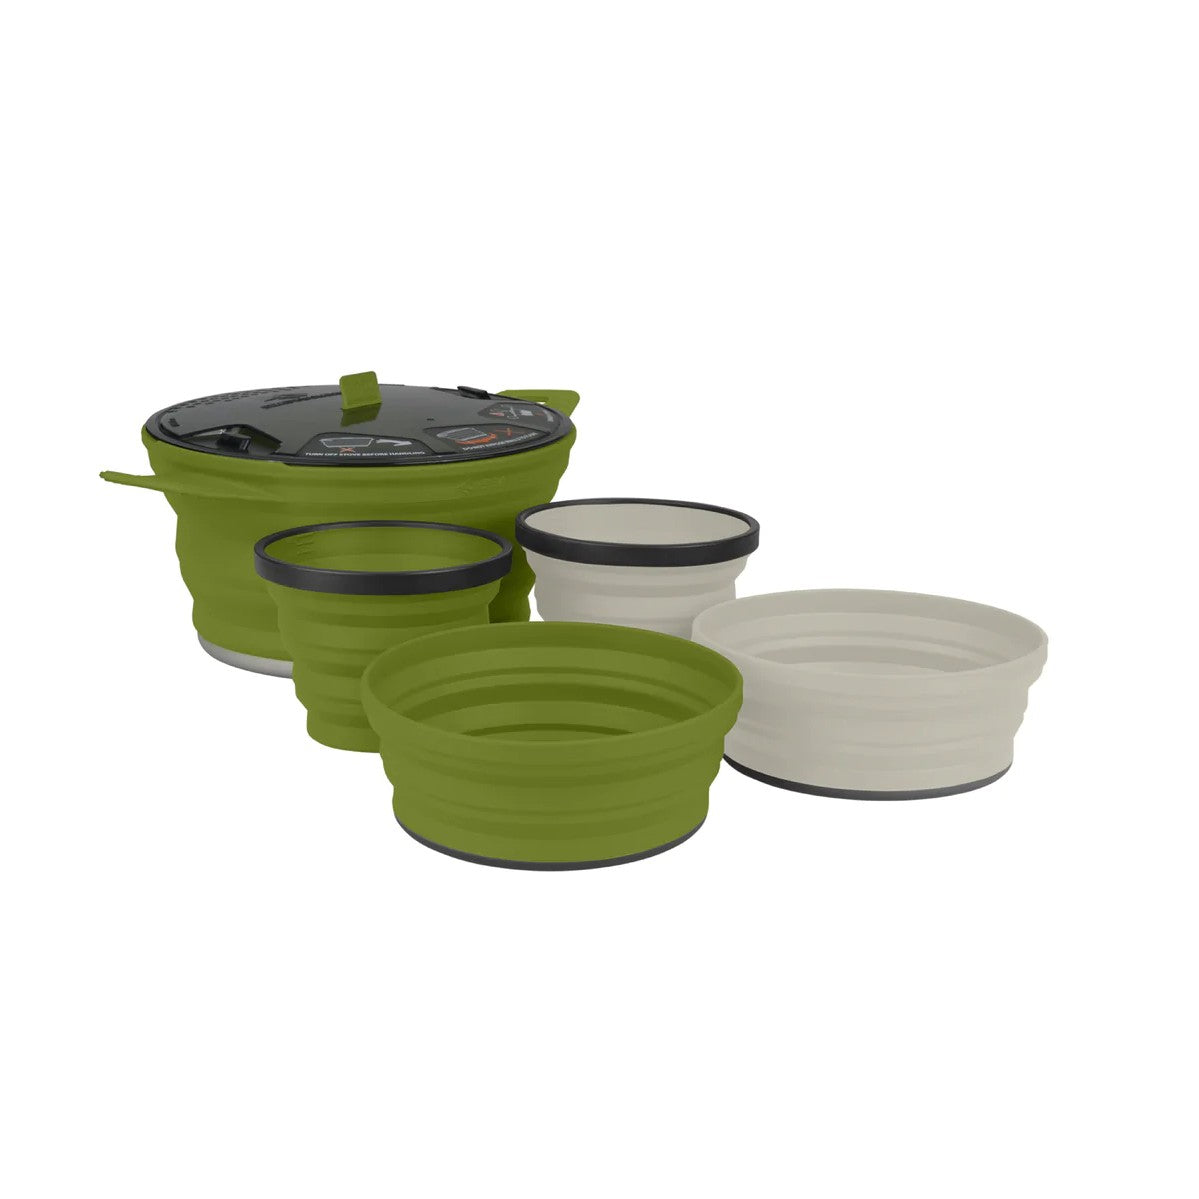 Sea to Summit X-Set 31 Cooking set (Pot, Plates and Cups)